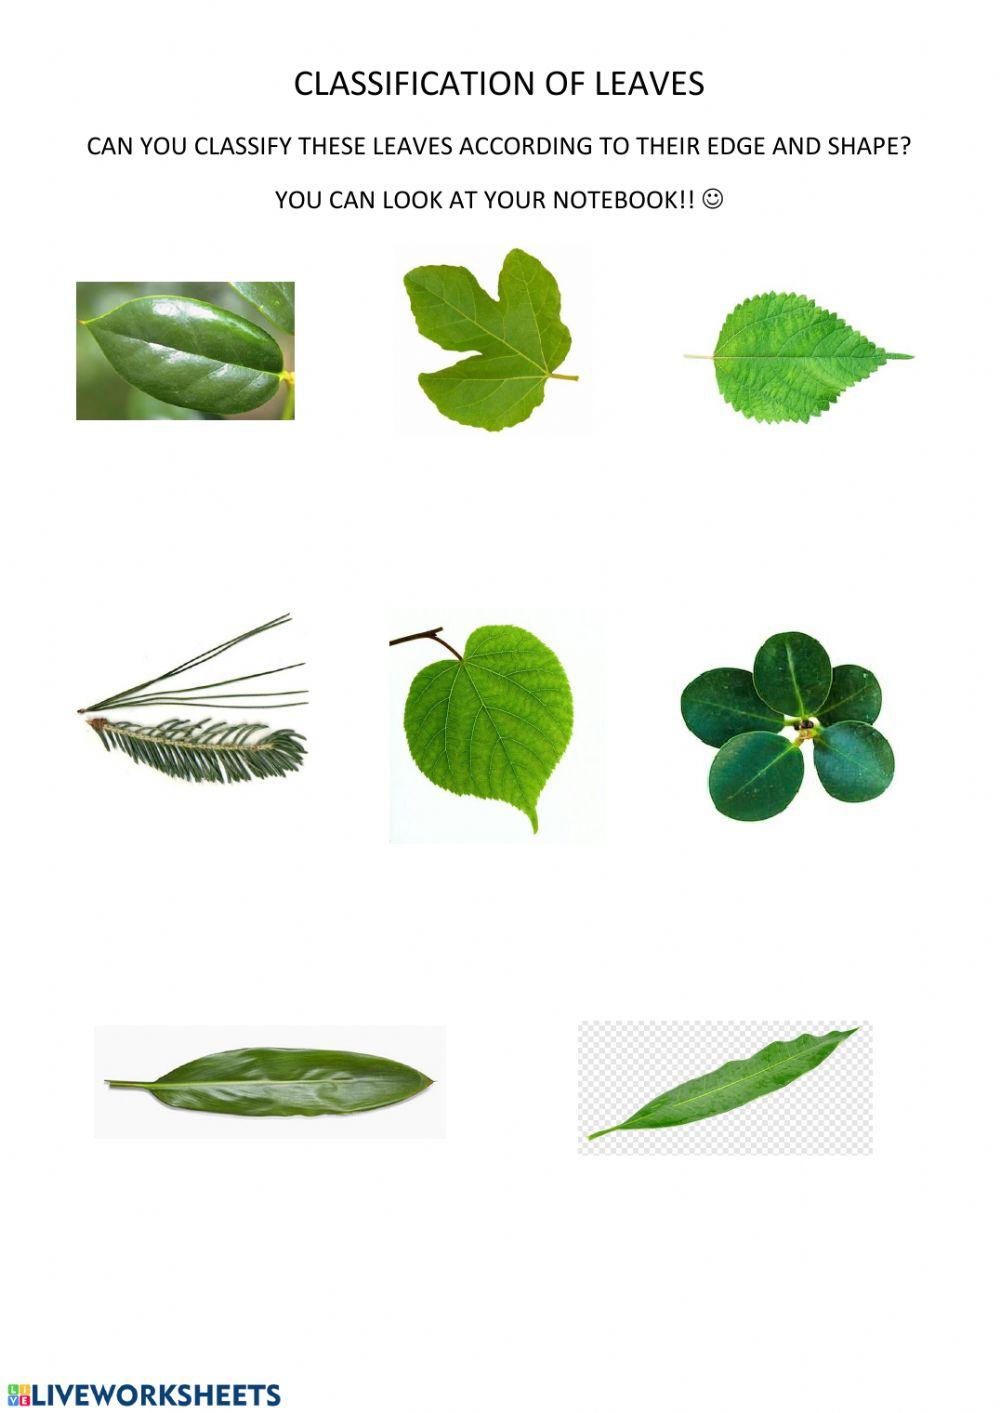 Classification of leaves